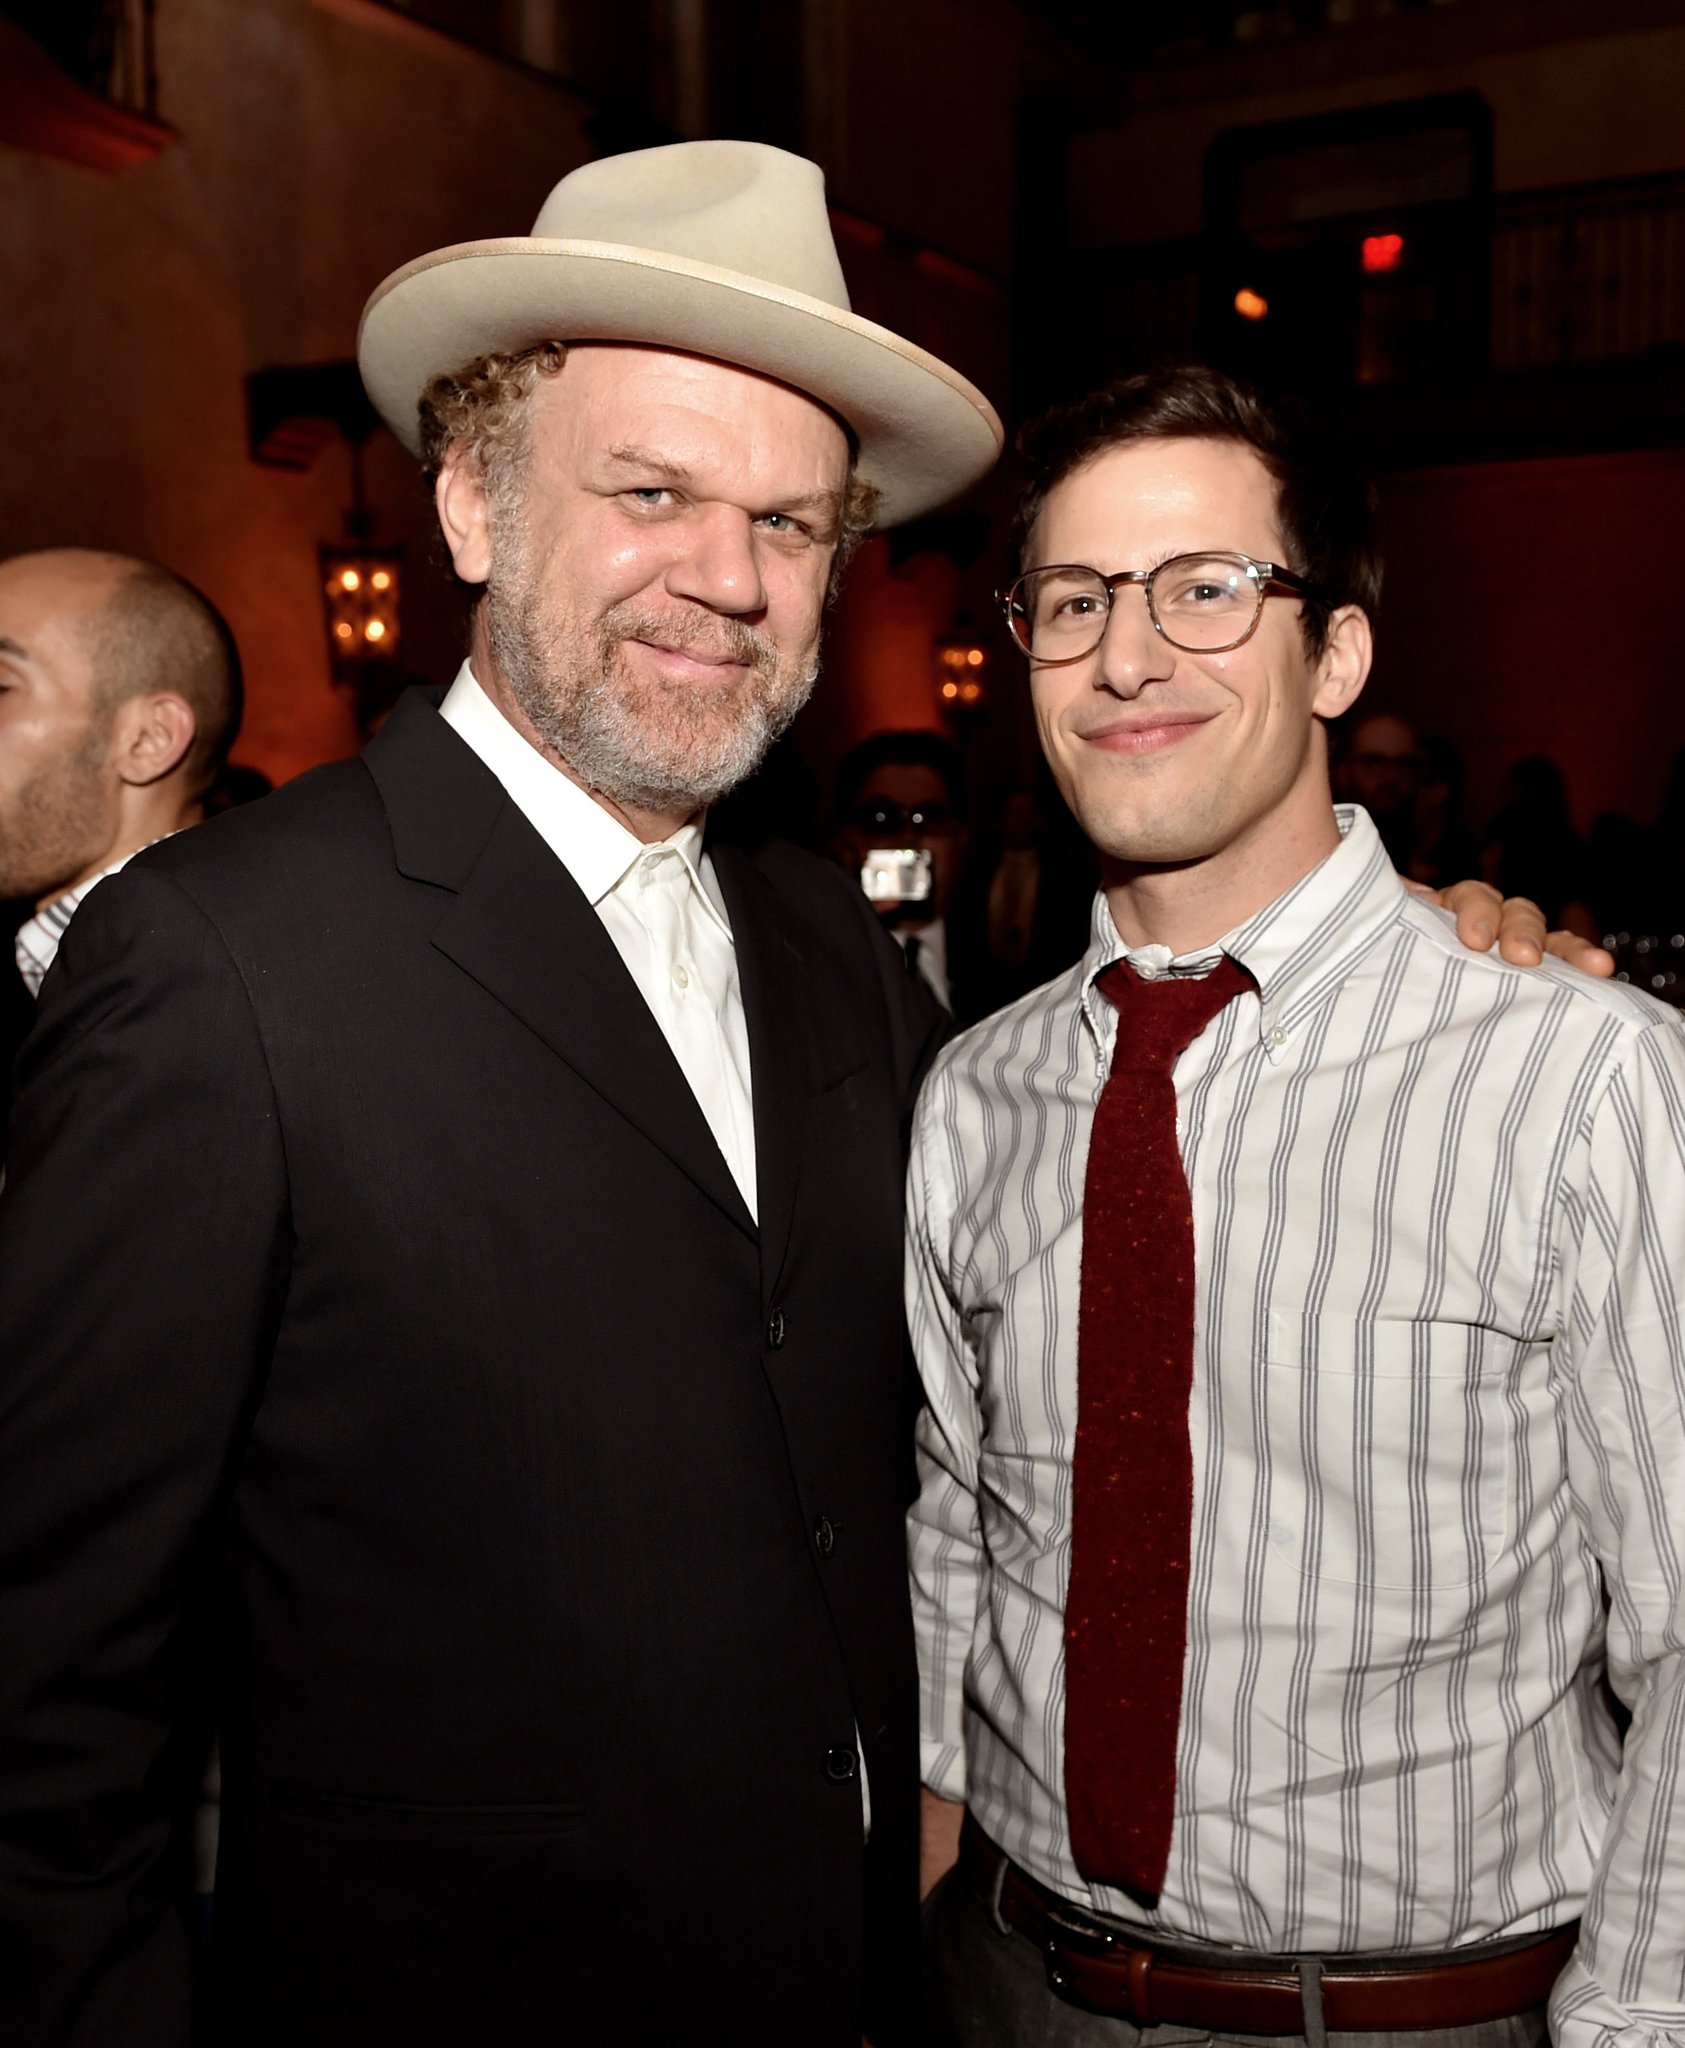 John C. Reilly and Andy Samberg at event of Zmogiska silpnybe (2014)